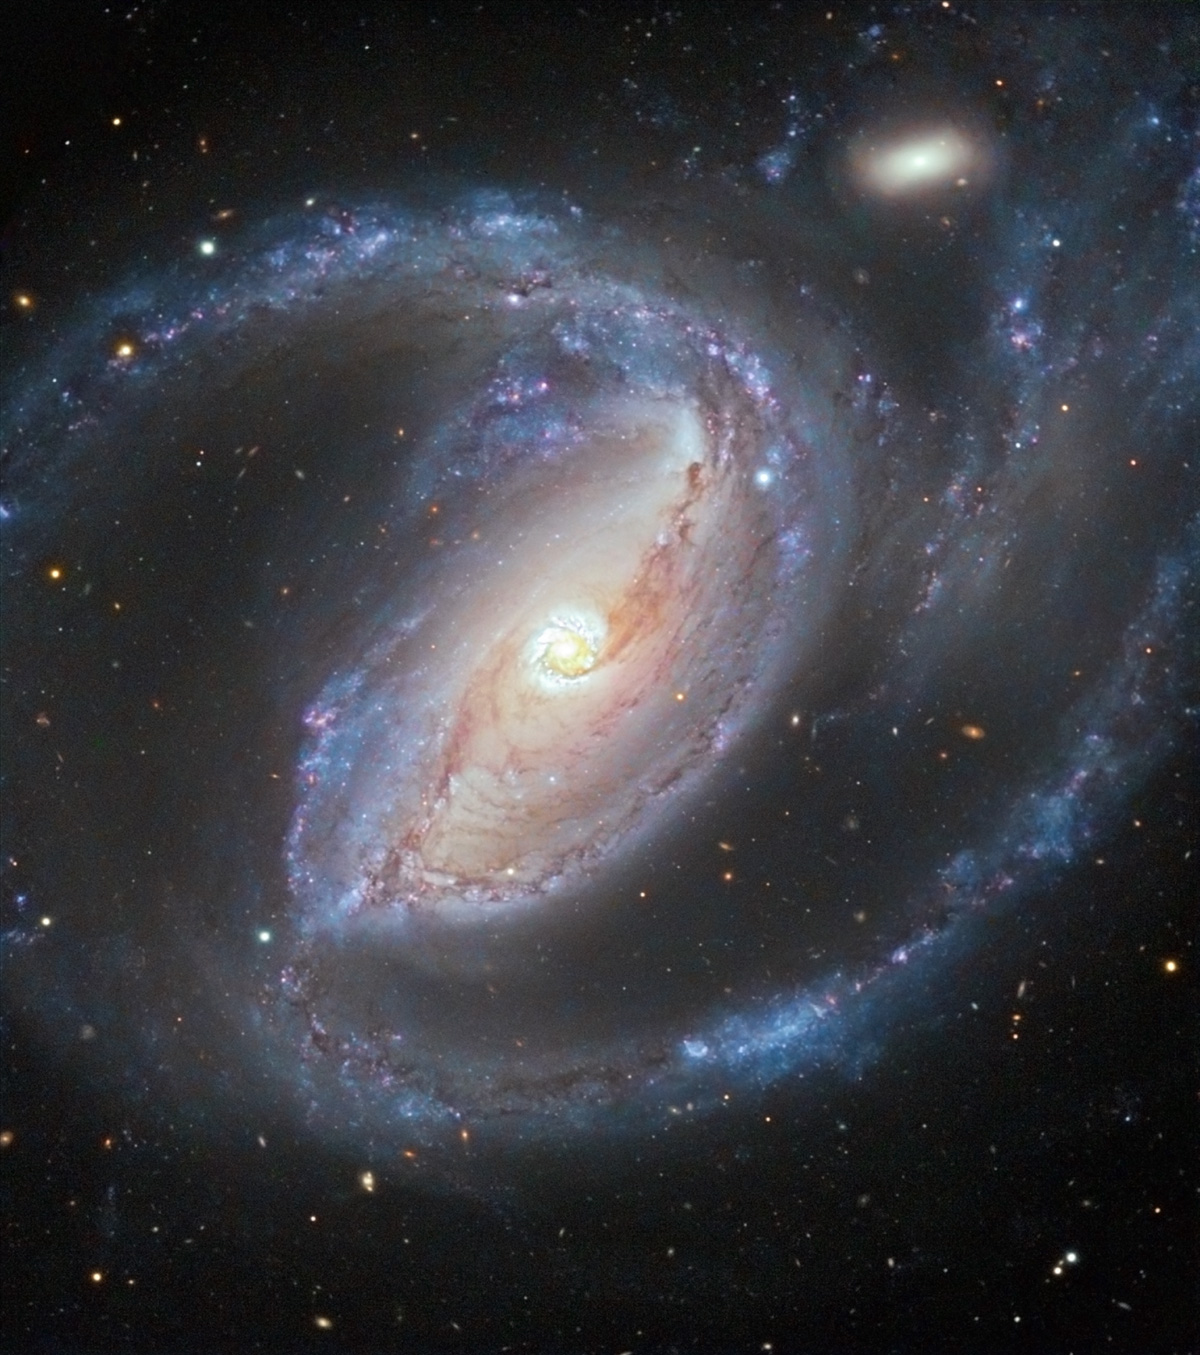 NGC 1097 observed in the optical light with VLT operated by ESO.